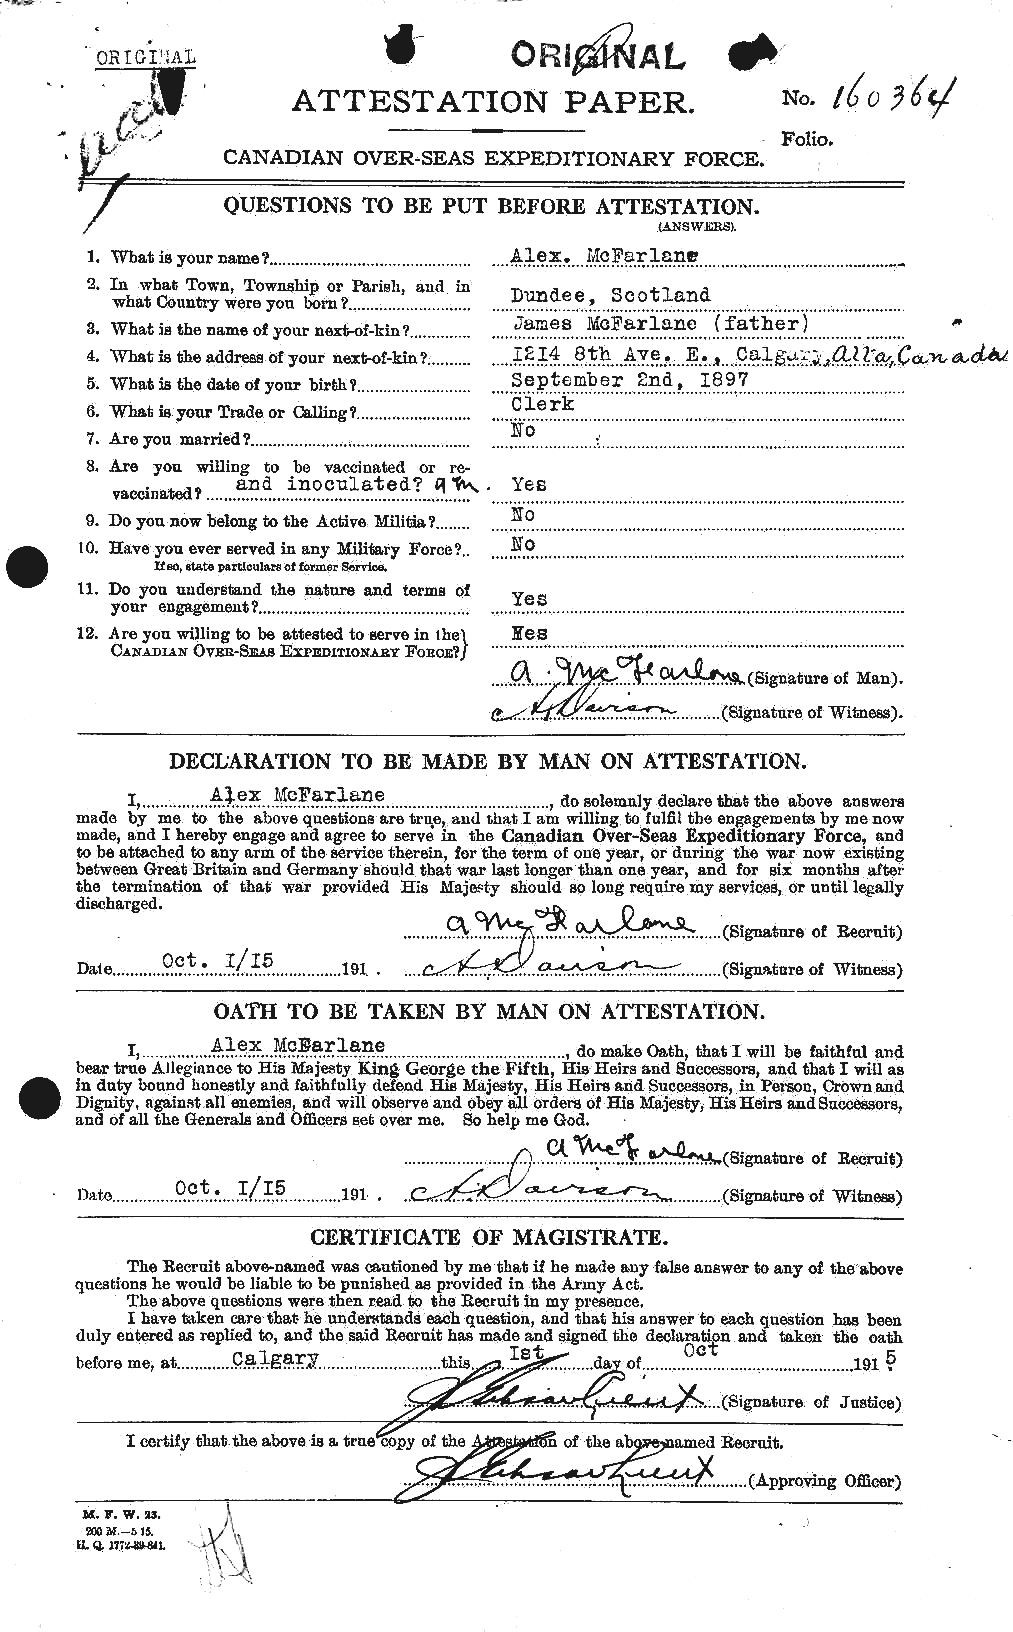 Personnel Records of the First World War - CEF 521685a